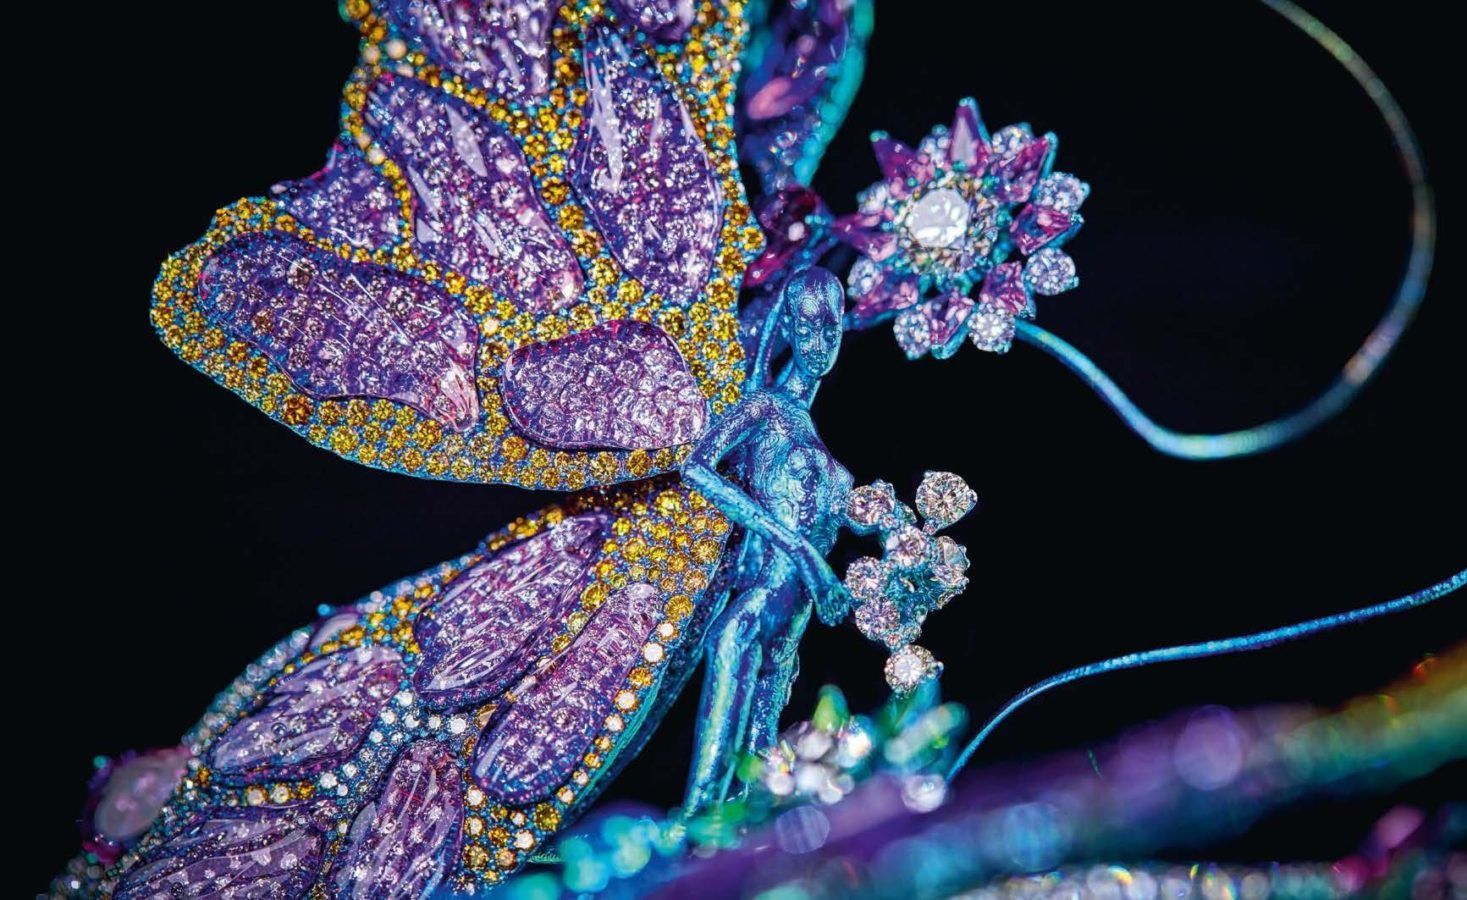 When is Jewellery an Art? We Speak to Experts on Gems & Jewels to Find Out